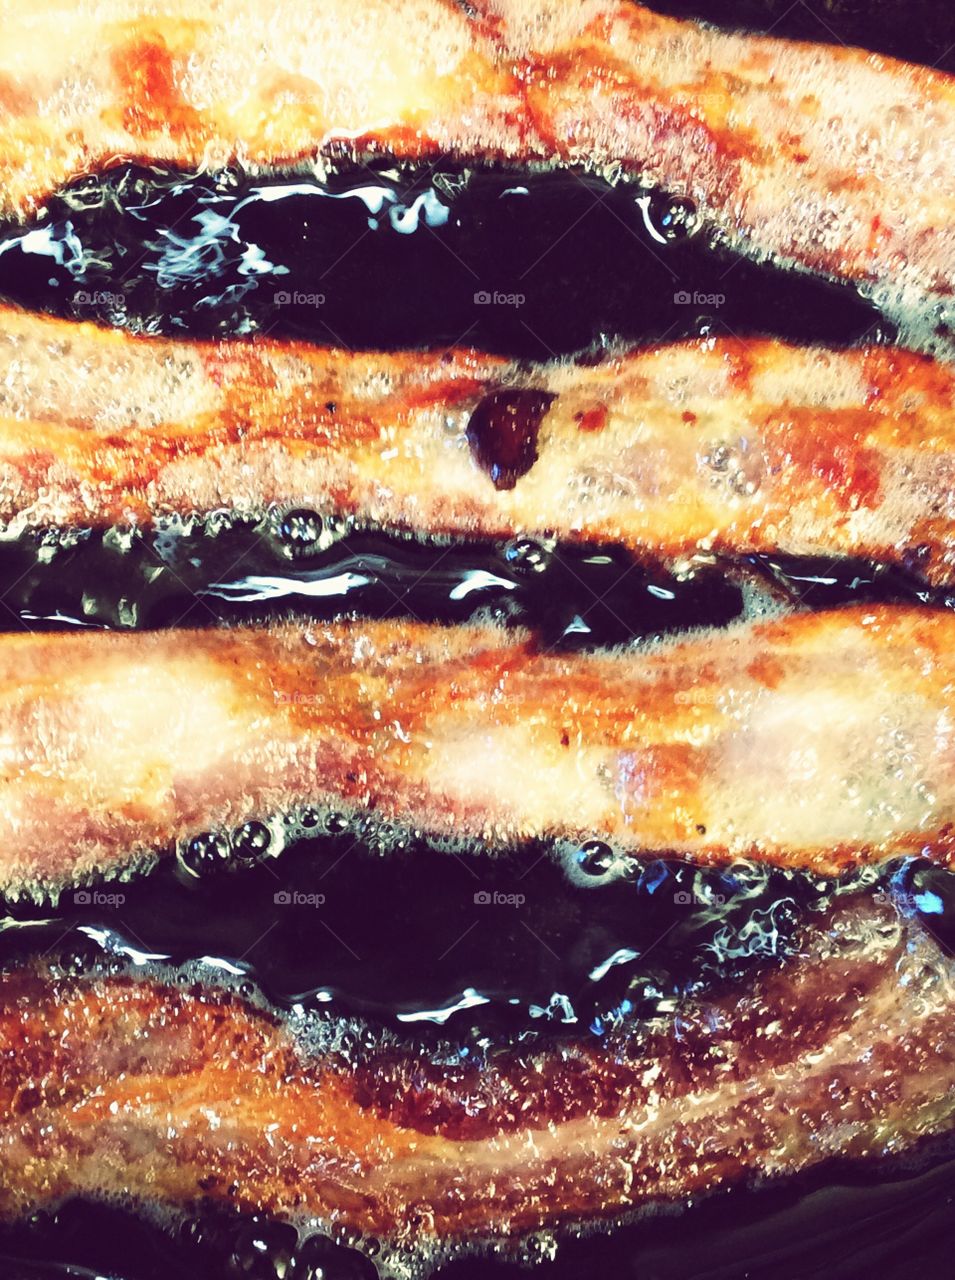 Bacon sizzling in neon filter